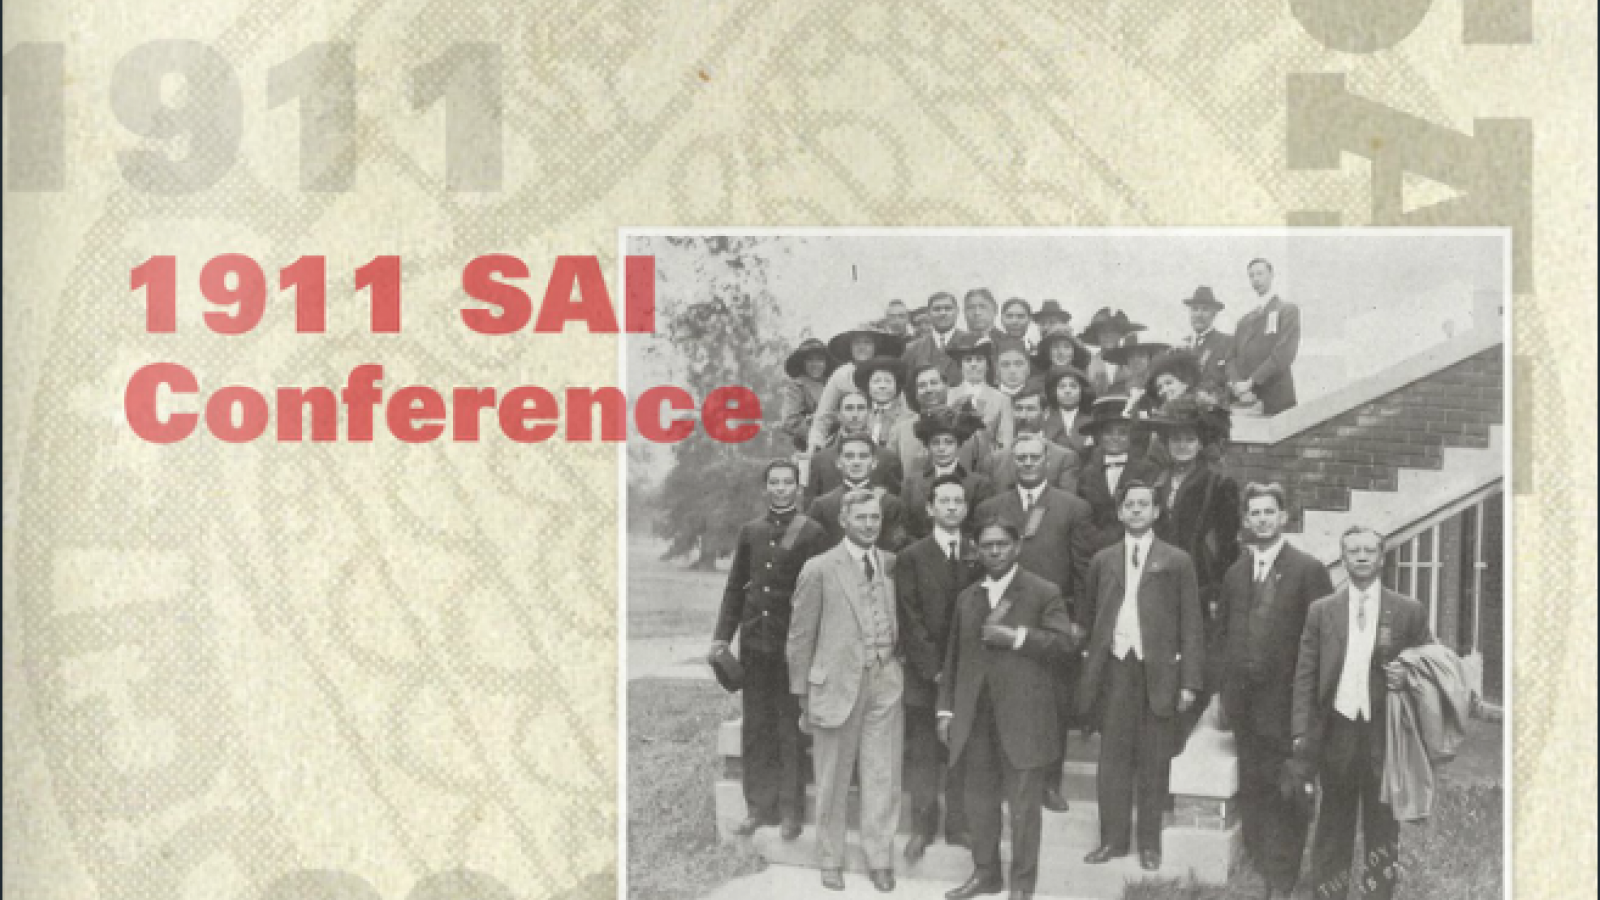 Society of American Indians Conference, Image 1